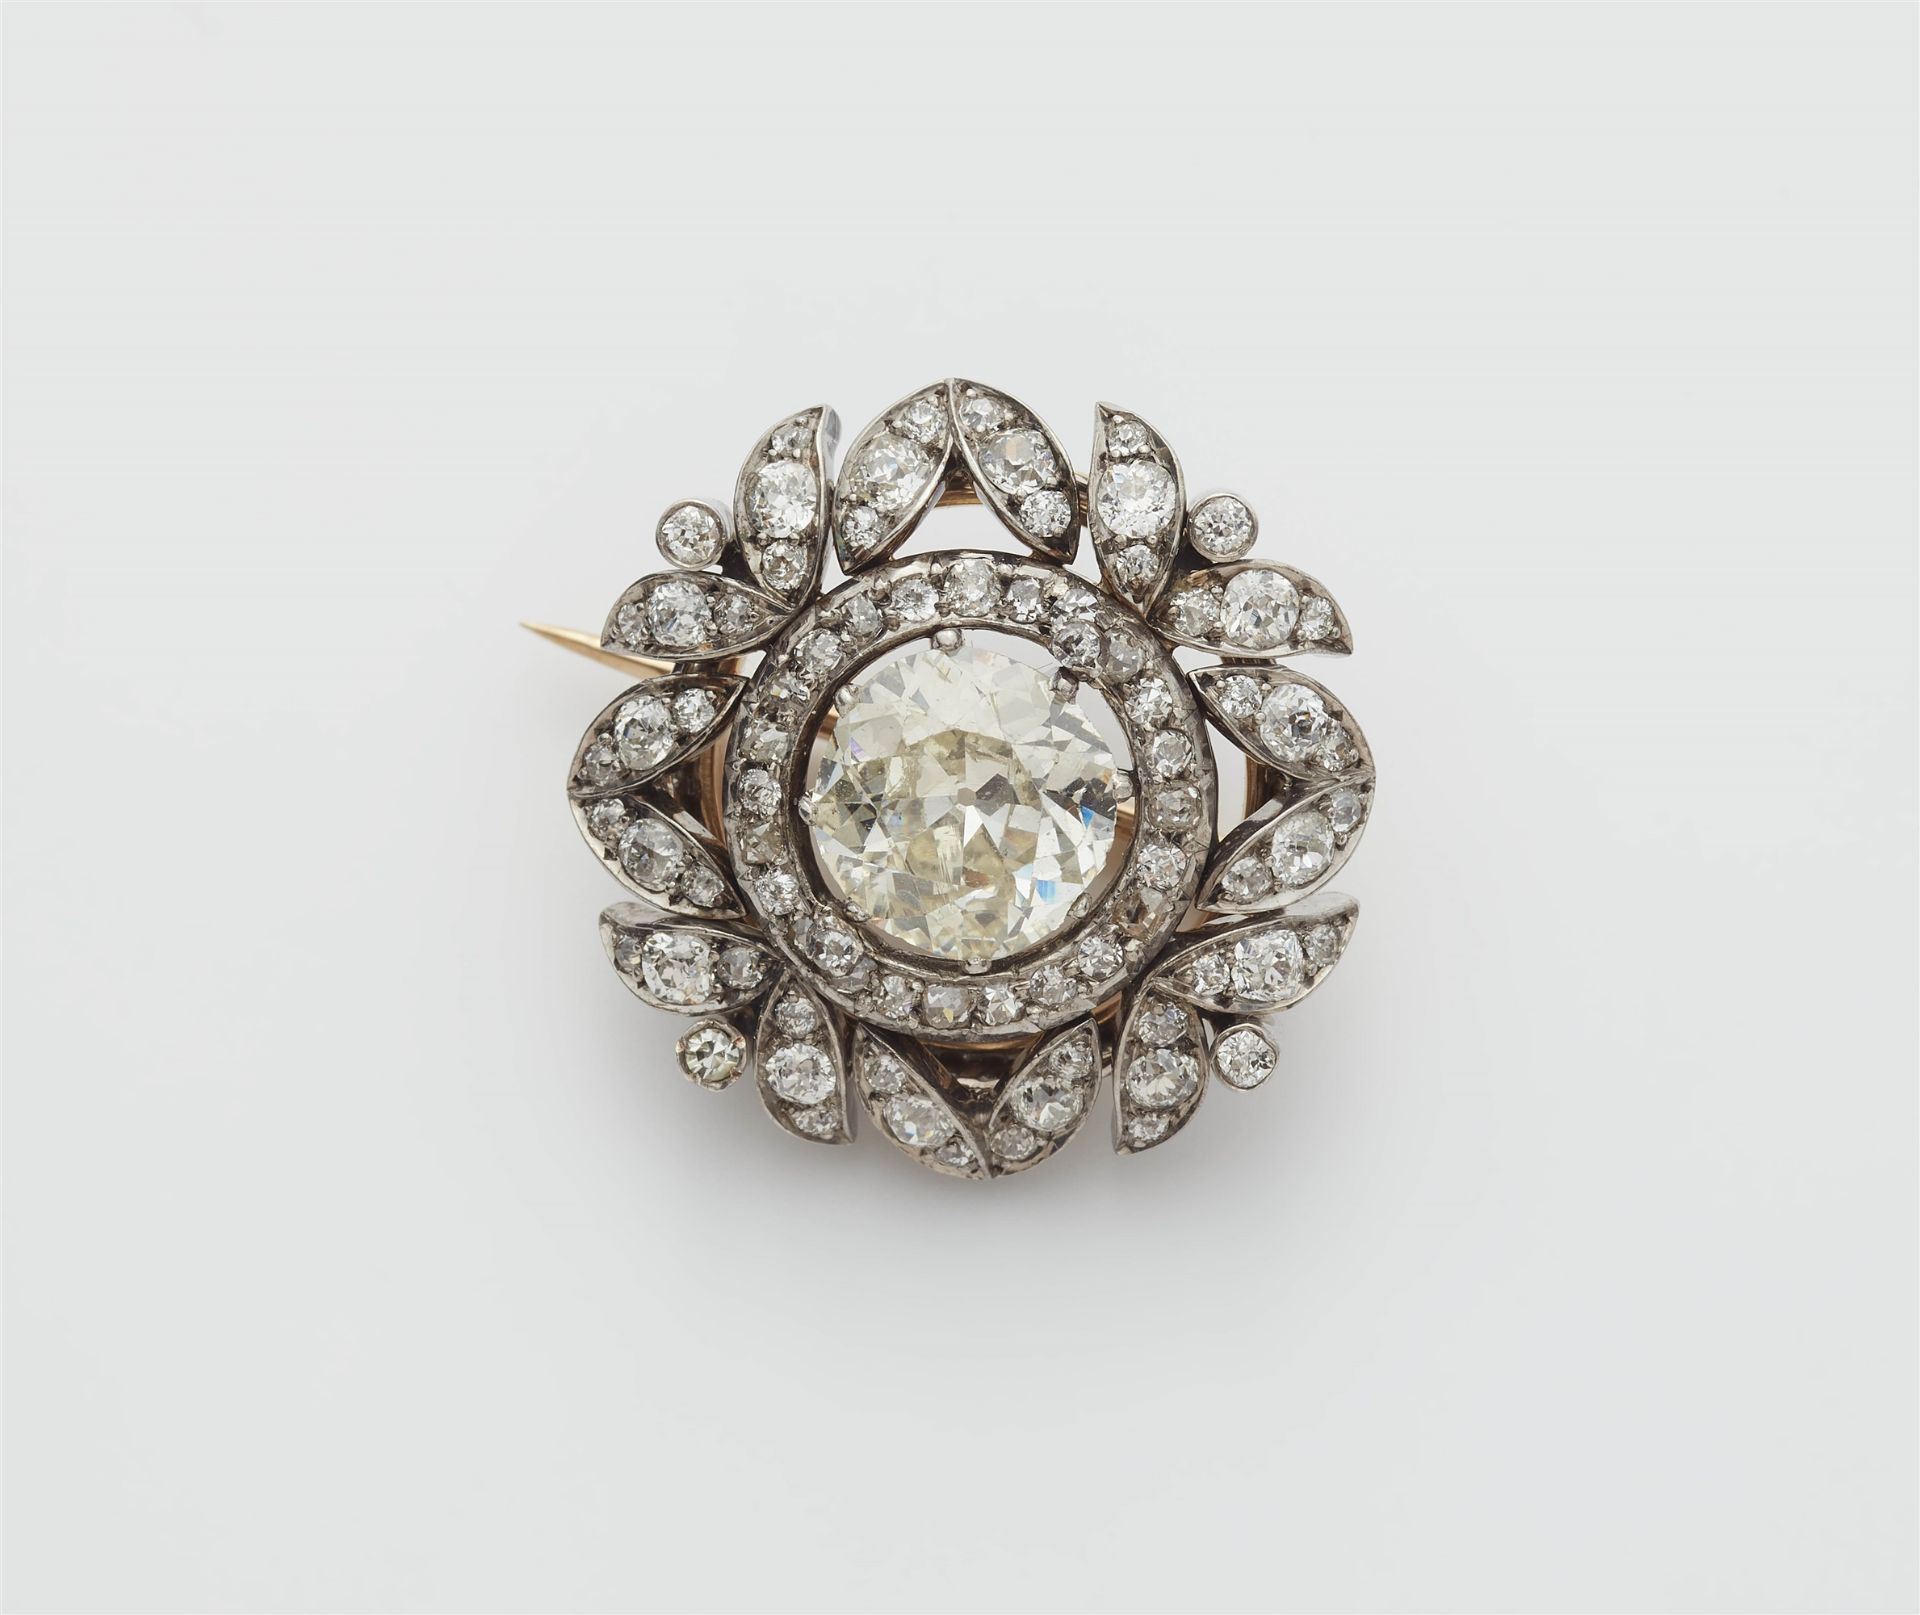 A Viennese 14k gold diamond brooch with a ca. 3.23 ct European old-cut centre stone.